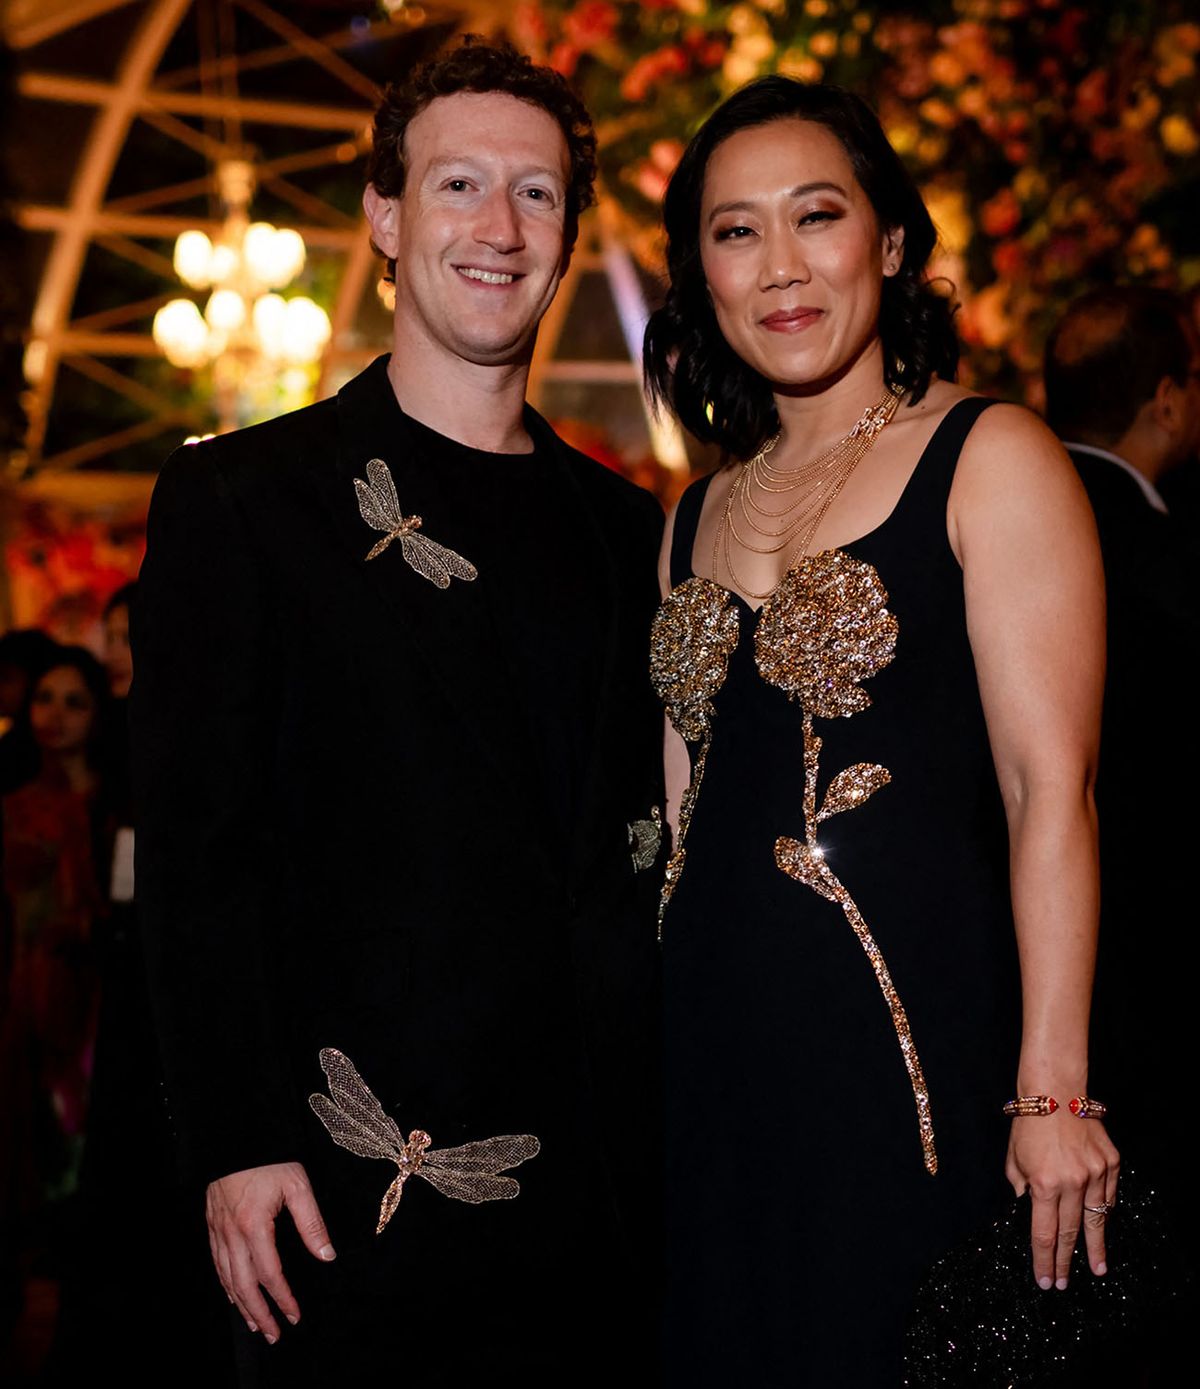 This handout photograph taken and released by Reliance on March 1, 2024, shows Meta chief Mark Zuckerberg (L) with his wife Priscilla Chan attending a three-day pre-wedding celebration hosted by billionaire tycoon Mukesh Ambani, for his son Anant Ambani and Radhika Merchant in Jamnagar. Rihanna and Meta chief Mark Zuckerberg were in India on March 1, for an extravagant pre-wedding party hosted by Asia's richest man, with celebrations expected to include other globally influential figures. (Photo by Reliance / AFP) / RESTRICTED TO EDITORIAL USE - MANDATORY CREDIT "AFP PHOTO /RELIANCE" - NO MARKETING NO ADVERTISING CAMPAIGNS - DISTRIBUTED AS A SERVICE TO CLIENTS